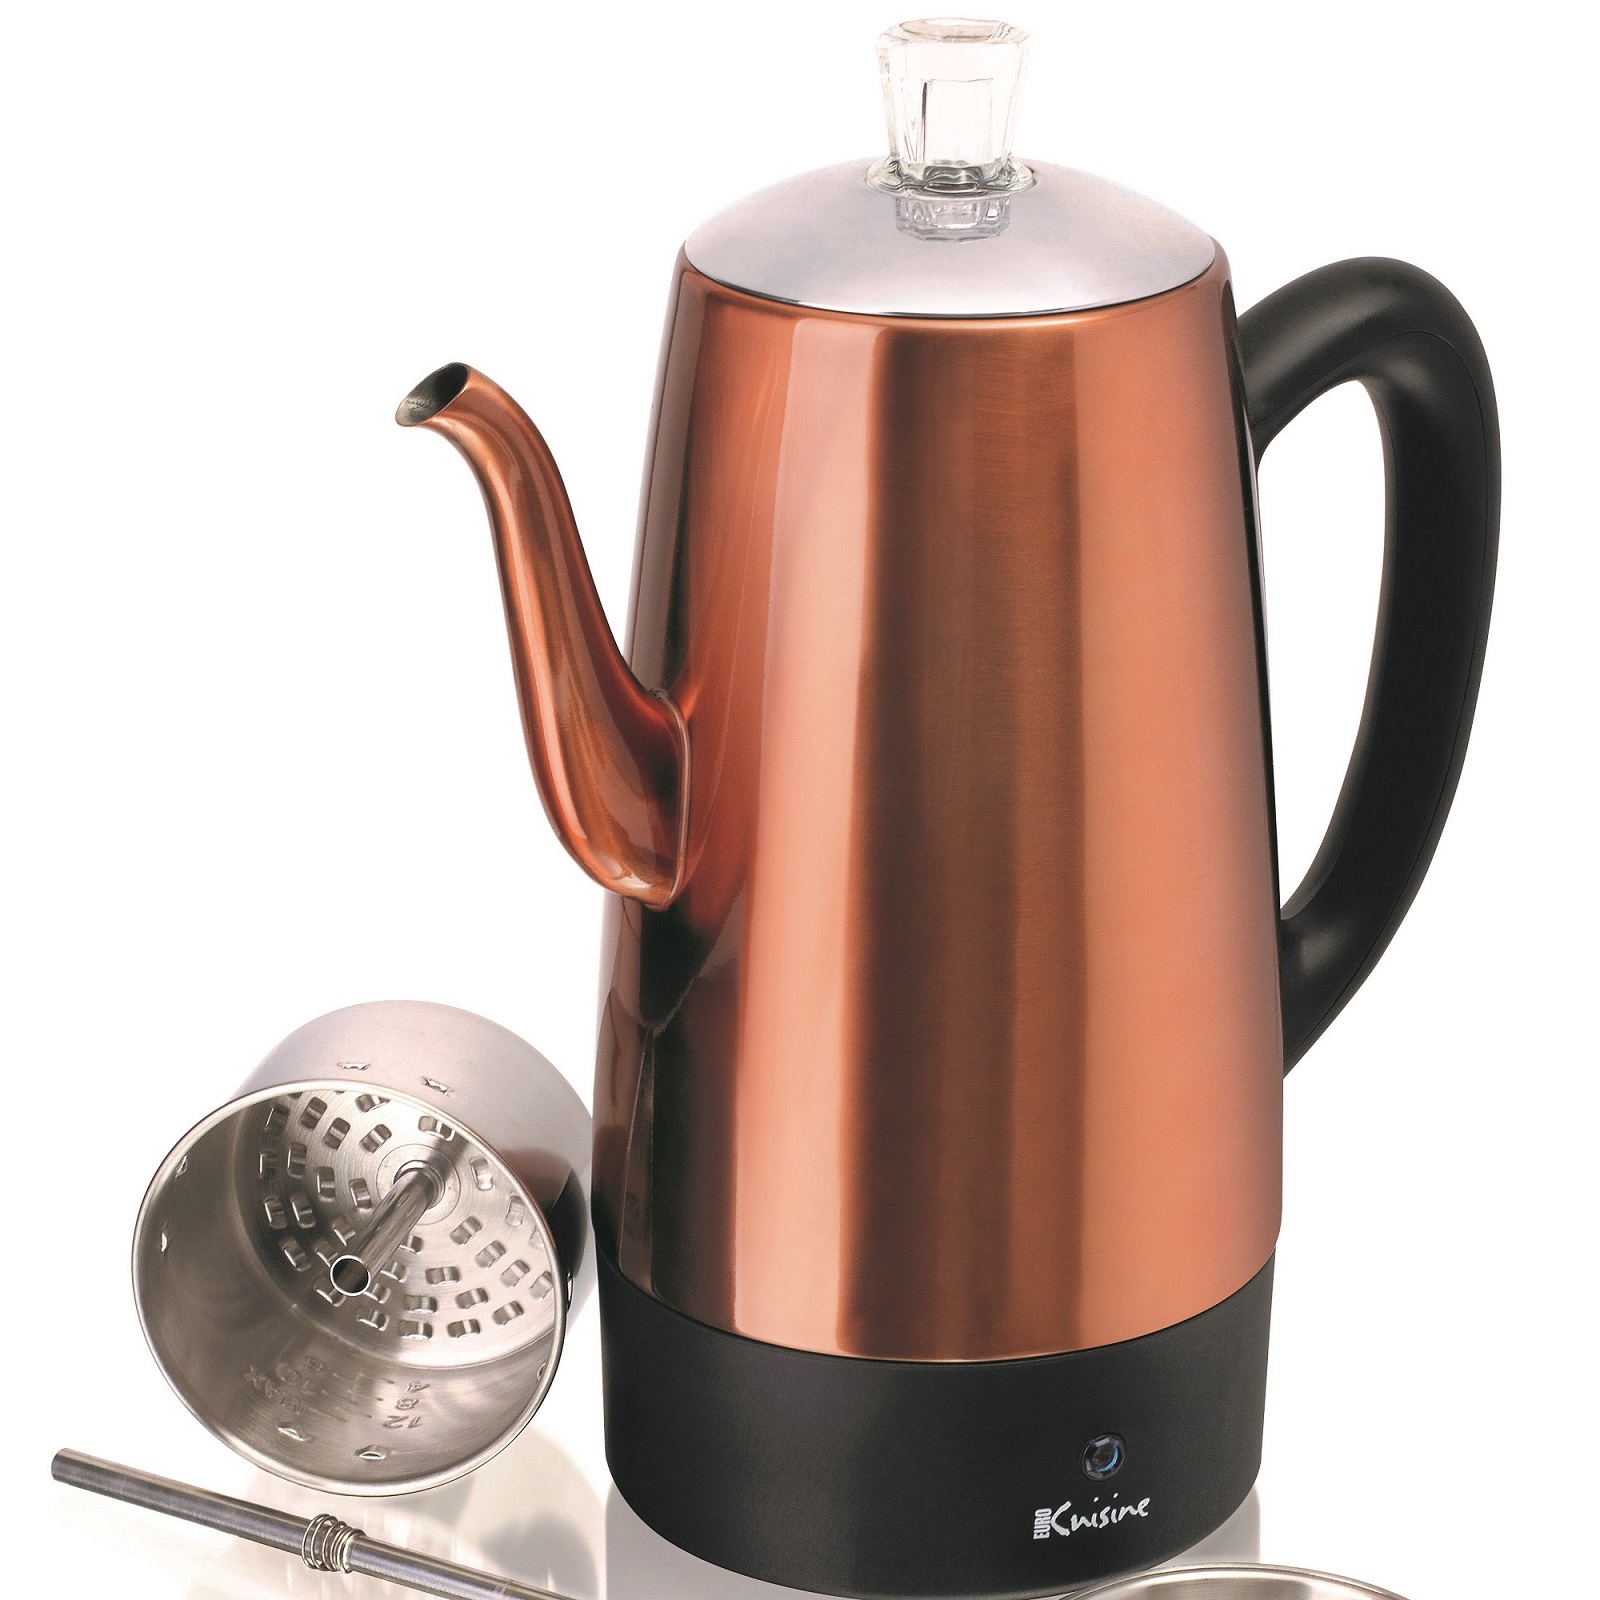 APOXCON Camping Coffee Pot with Glass Knob Top, 9 Cups Stainless Steel  Percolator Coffee Pot Coffee Maker for Campfire or Stovetop Coffee Making